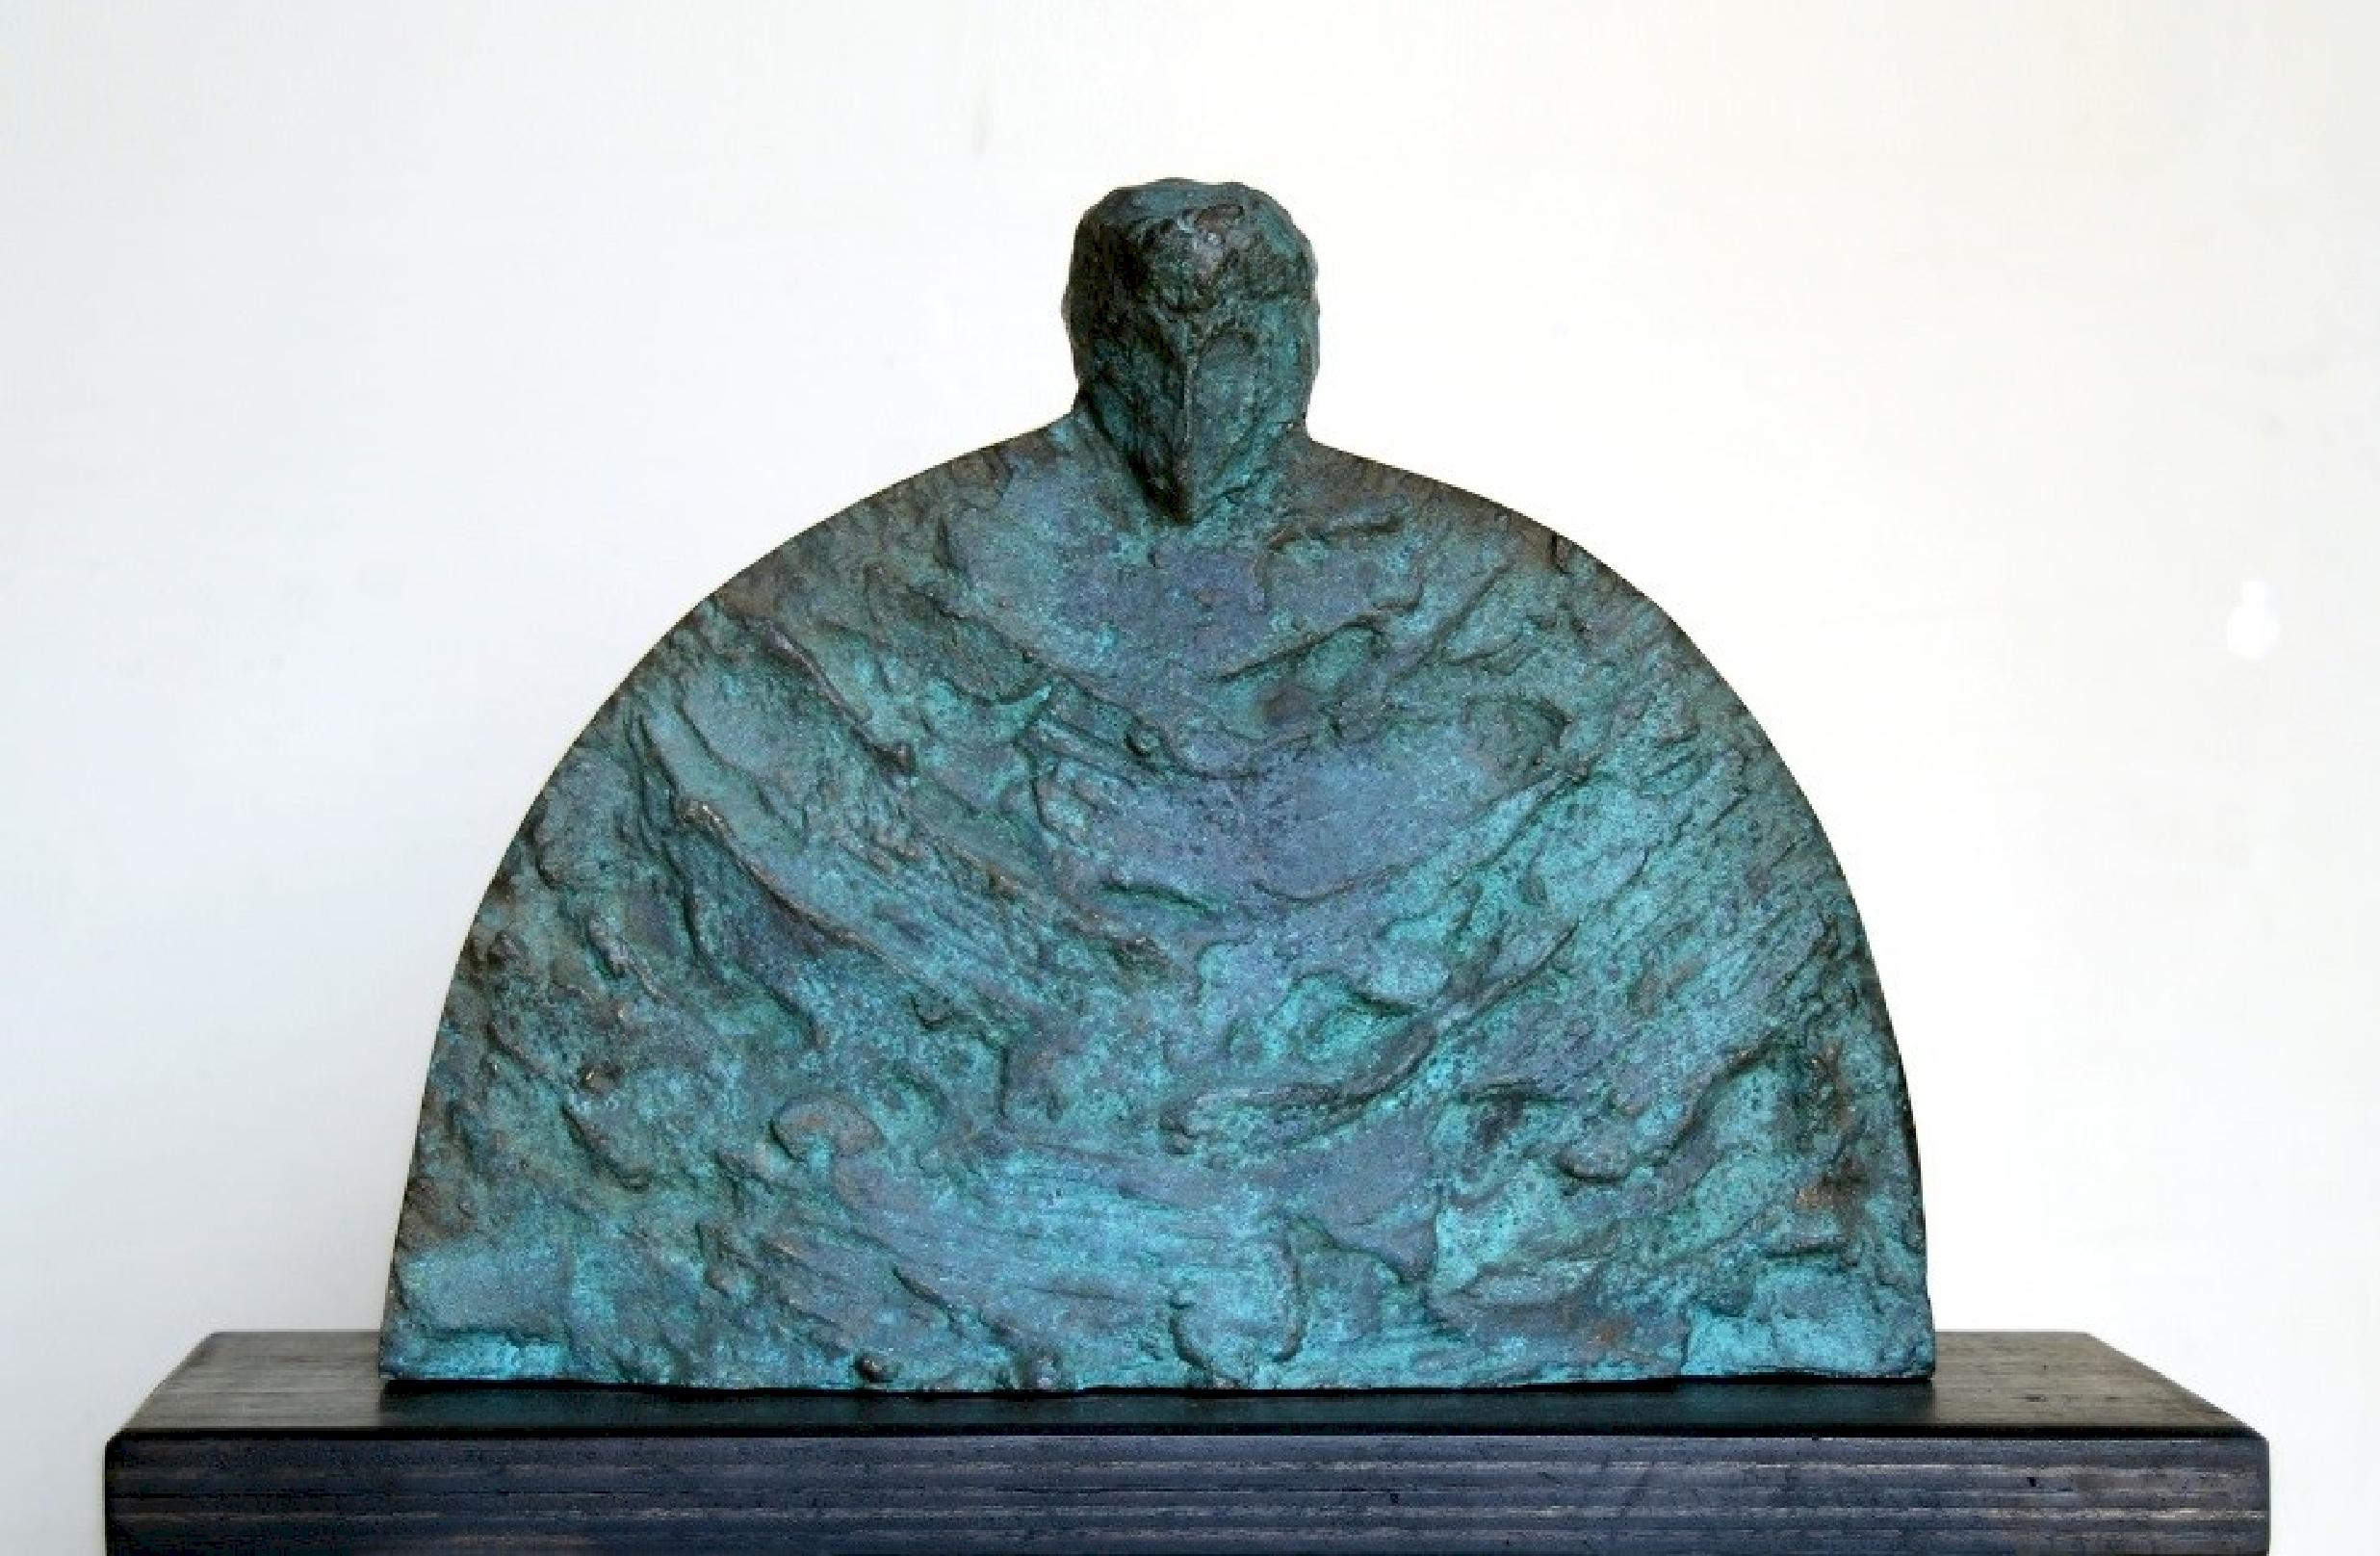 "Clergyman" Bronze Sculpture 11" x 14" x 5" inch by Sarkis Tossonian

Sarkis Tossoonian was born in Alexandria in 1953. He graduated from the Faculty of Fine Arts/Sculpture in 1979. He started exhibiting in individual and group exhibitions in